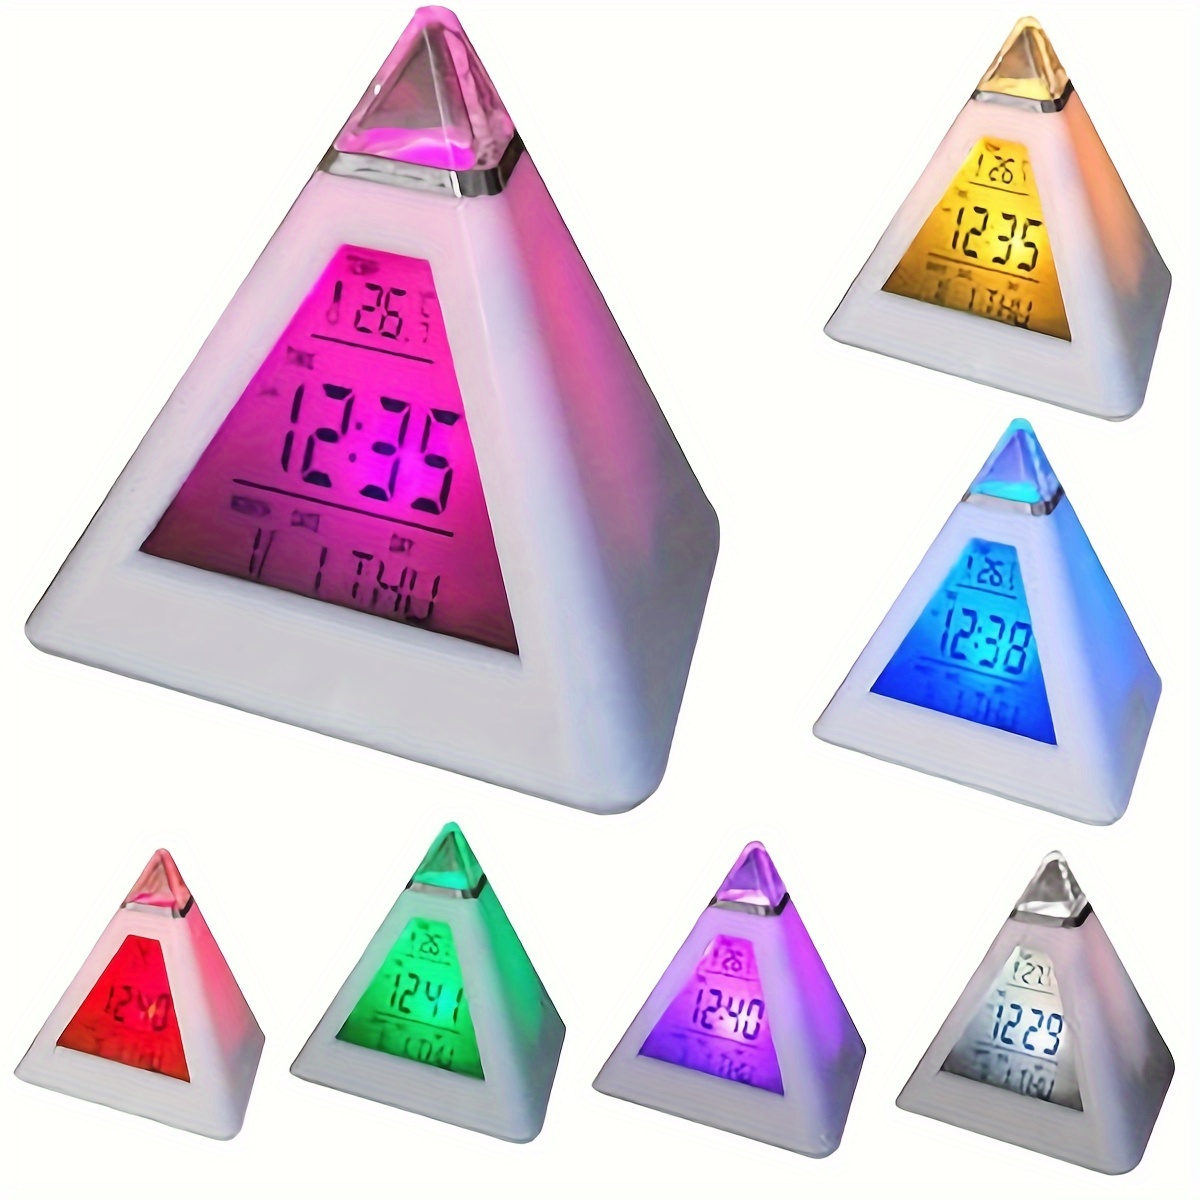 

1pc Led Digital Alarm Clock Quiet Pyramid Alarm Clock Battery Powered Night Light Desk Clock With Music & Snooze Mode 7 Color Changing Desktop Clock Decoration For Bedroom Office